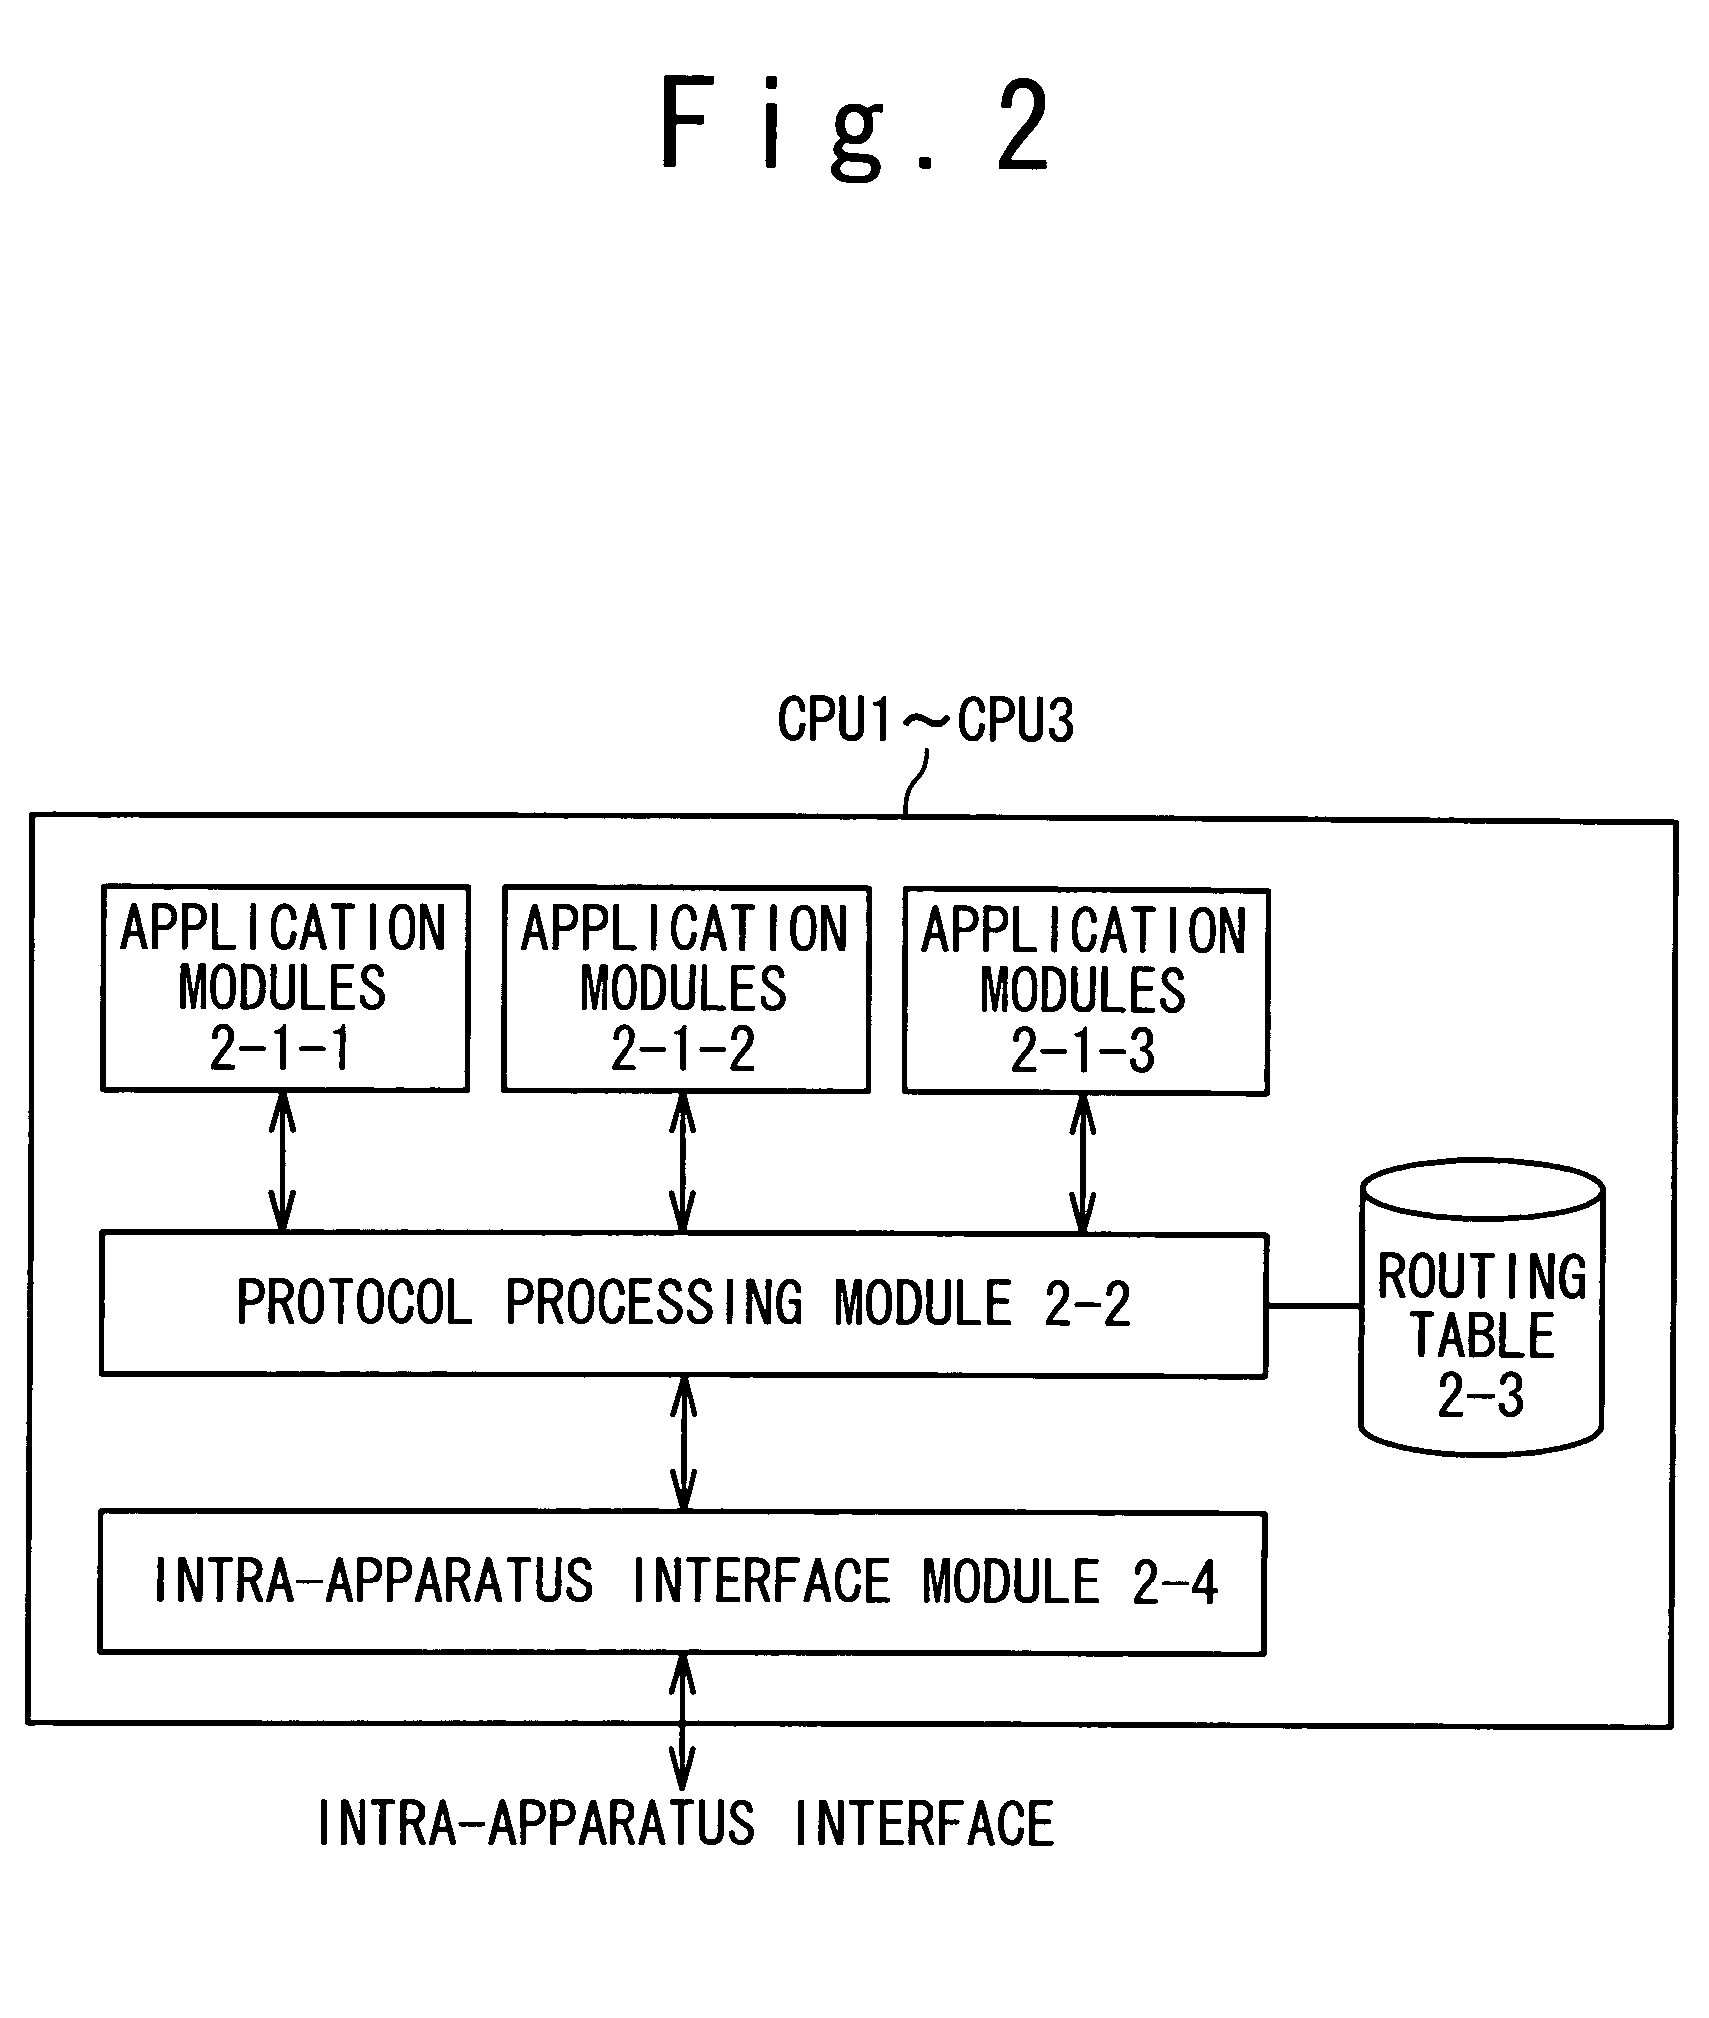 Packet transfer apparatus with multiple general-purpose processors